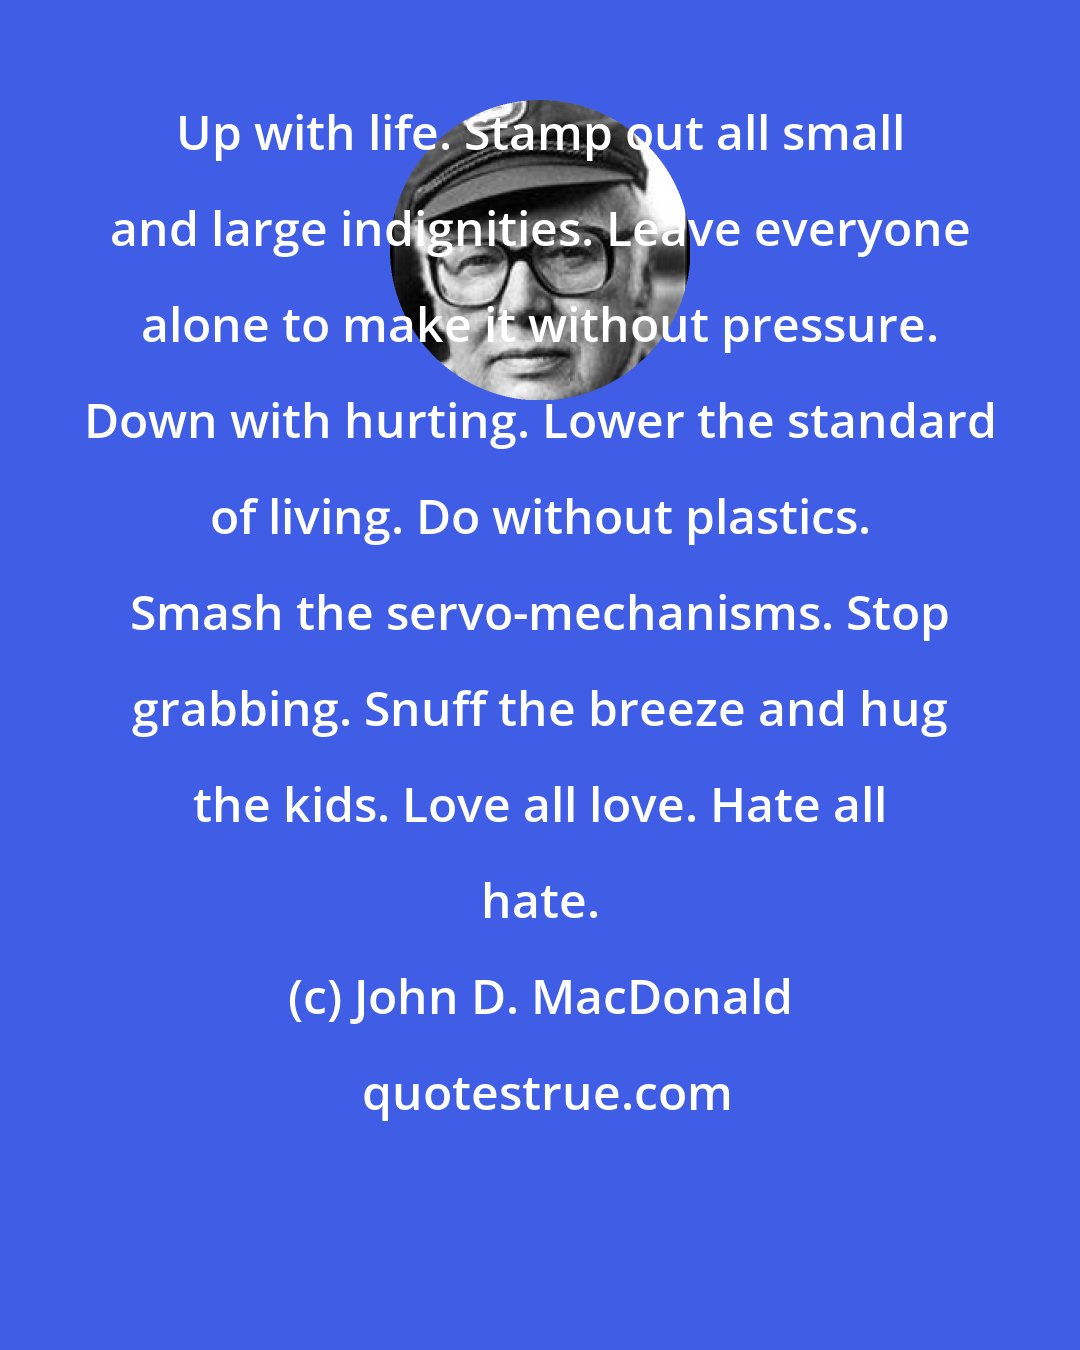 John D. MacDonald: Up with life. Stamp out all small and large indignities. Leave everyone alone to make it without pressure. Down with hurting. Lower the standard of living. Do without plastics. Smash the servo-mechanisms. Stop grabbing. Snuff the breeze and hug the kids. Love all love. Hate all hate.